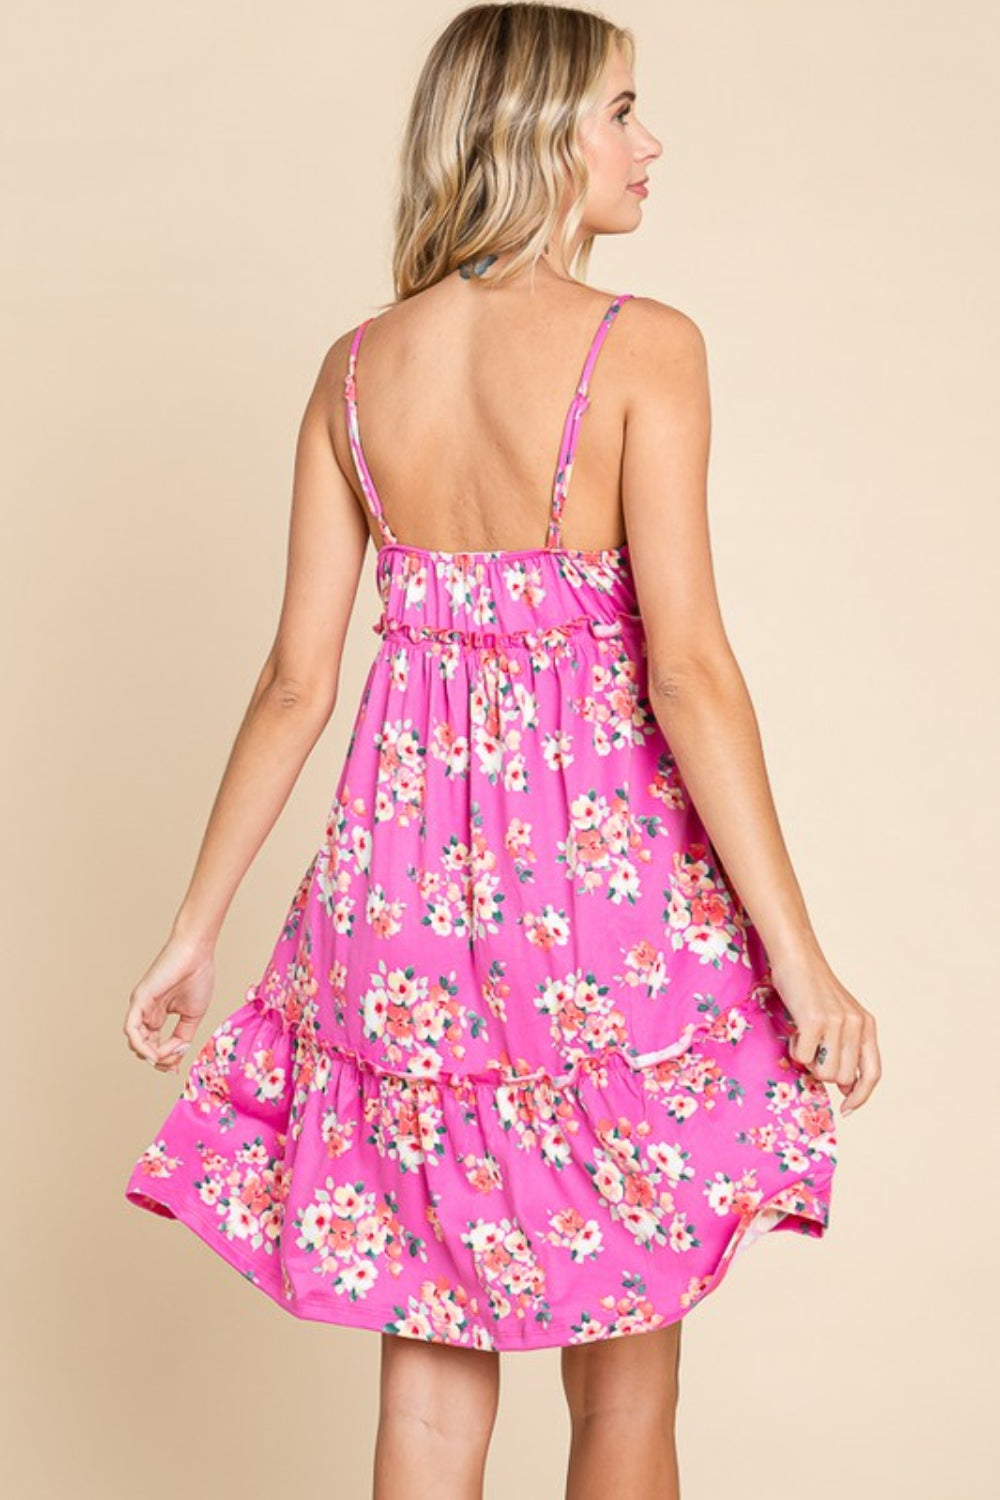 Summer Chic: Floral Ruffled Cami Dress for Beach Weddings & Parties